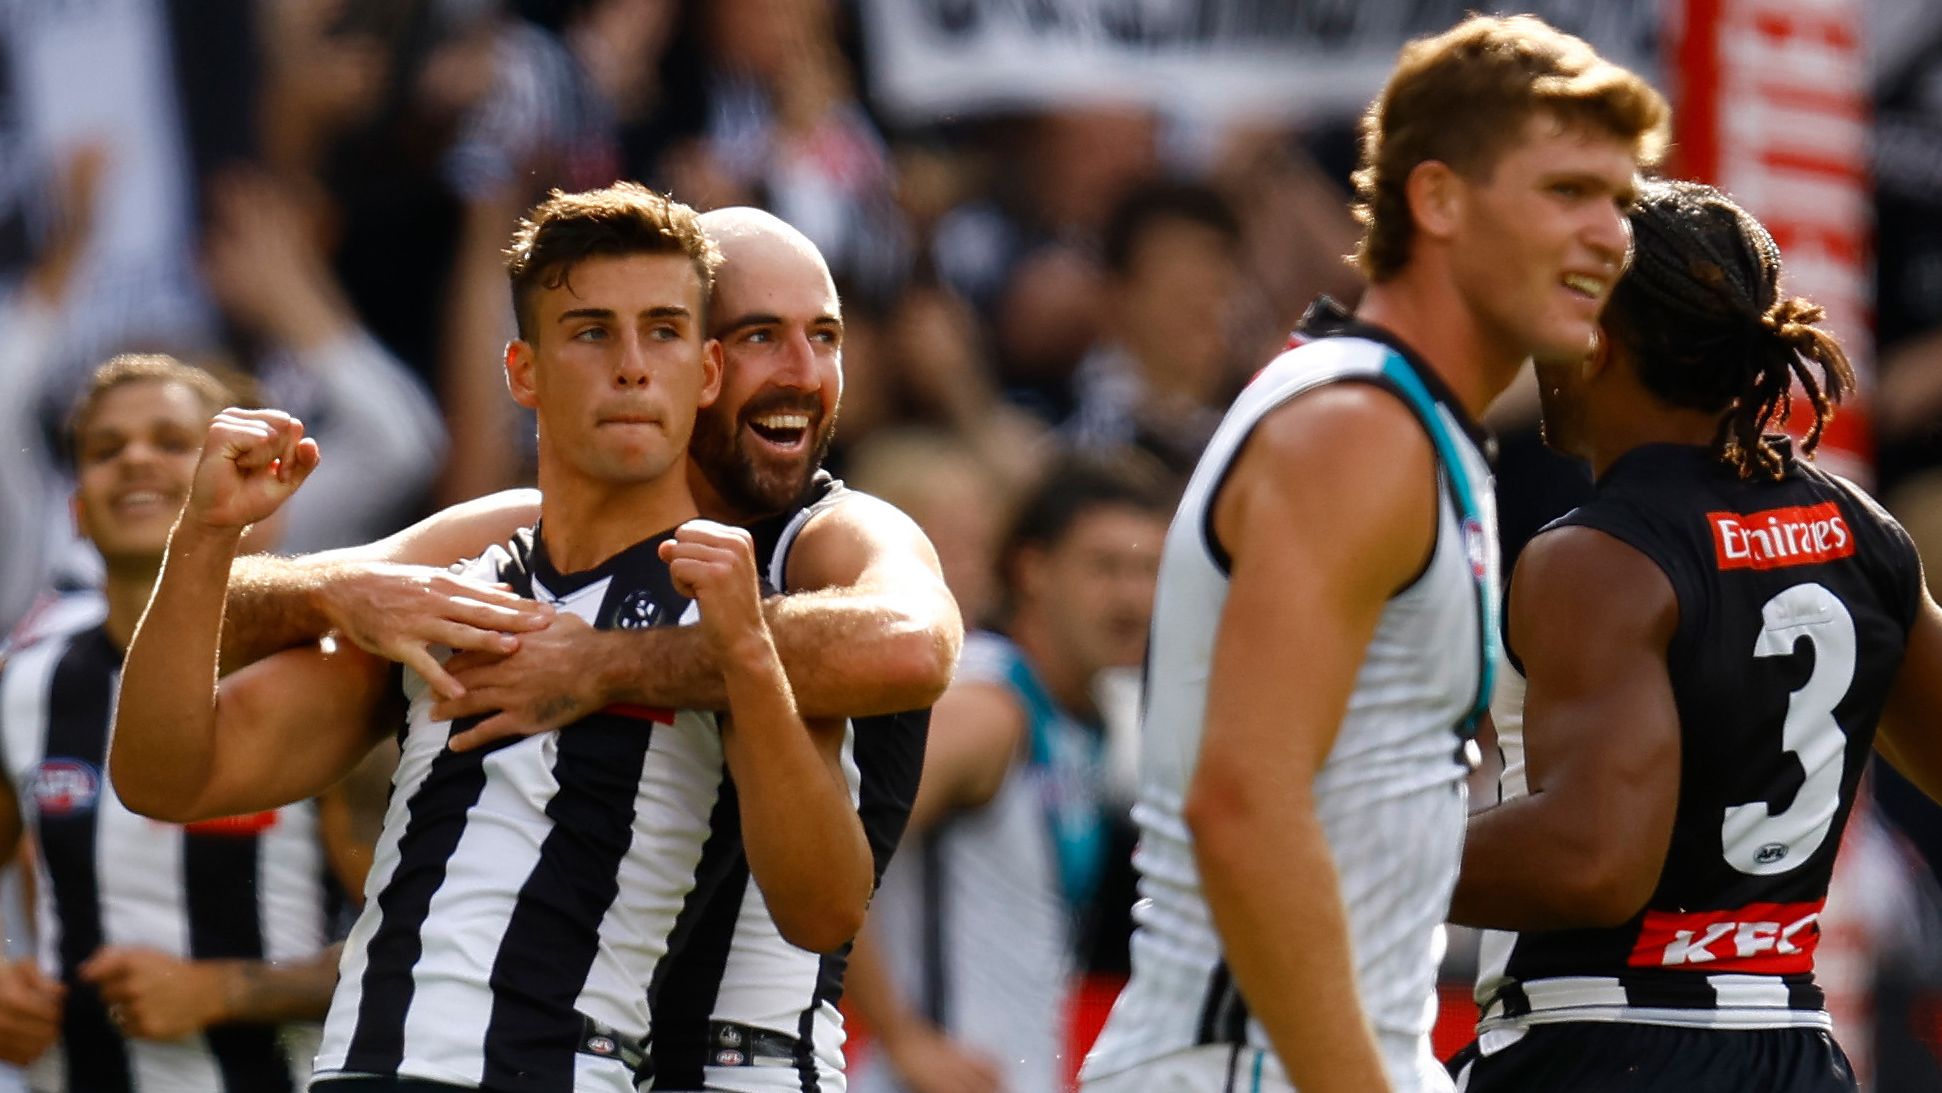 MELBOURNE, AUSTRALIA - MARCH 25: Nick Daicos (left) and Steele Sidebottom of the Magpies celebrate during the 2023 AFL Round 02 match between the Collingwood Magpies and the Port Adelaide Power at the Melbourne Cricket Ground on March 25, 2023 in Melbourne, Australia. (Photo by Michael Willson/AFL Photos)